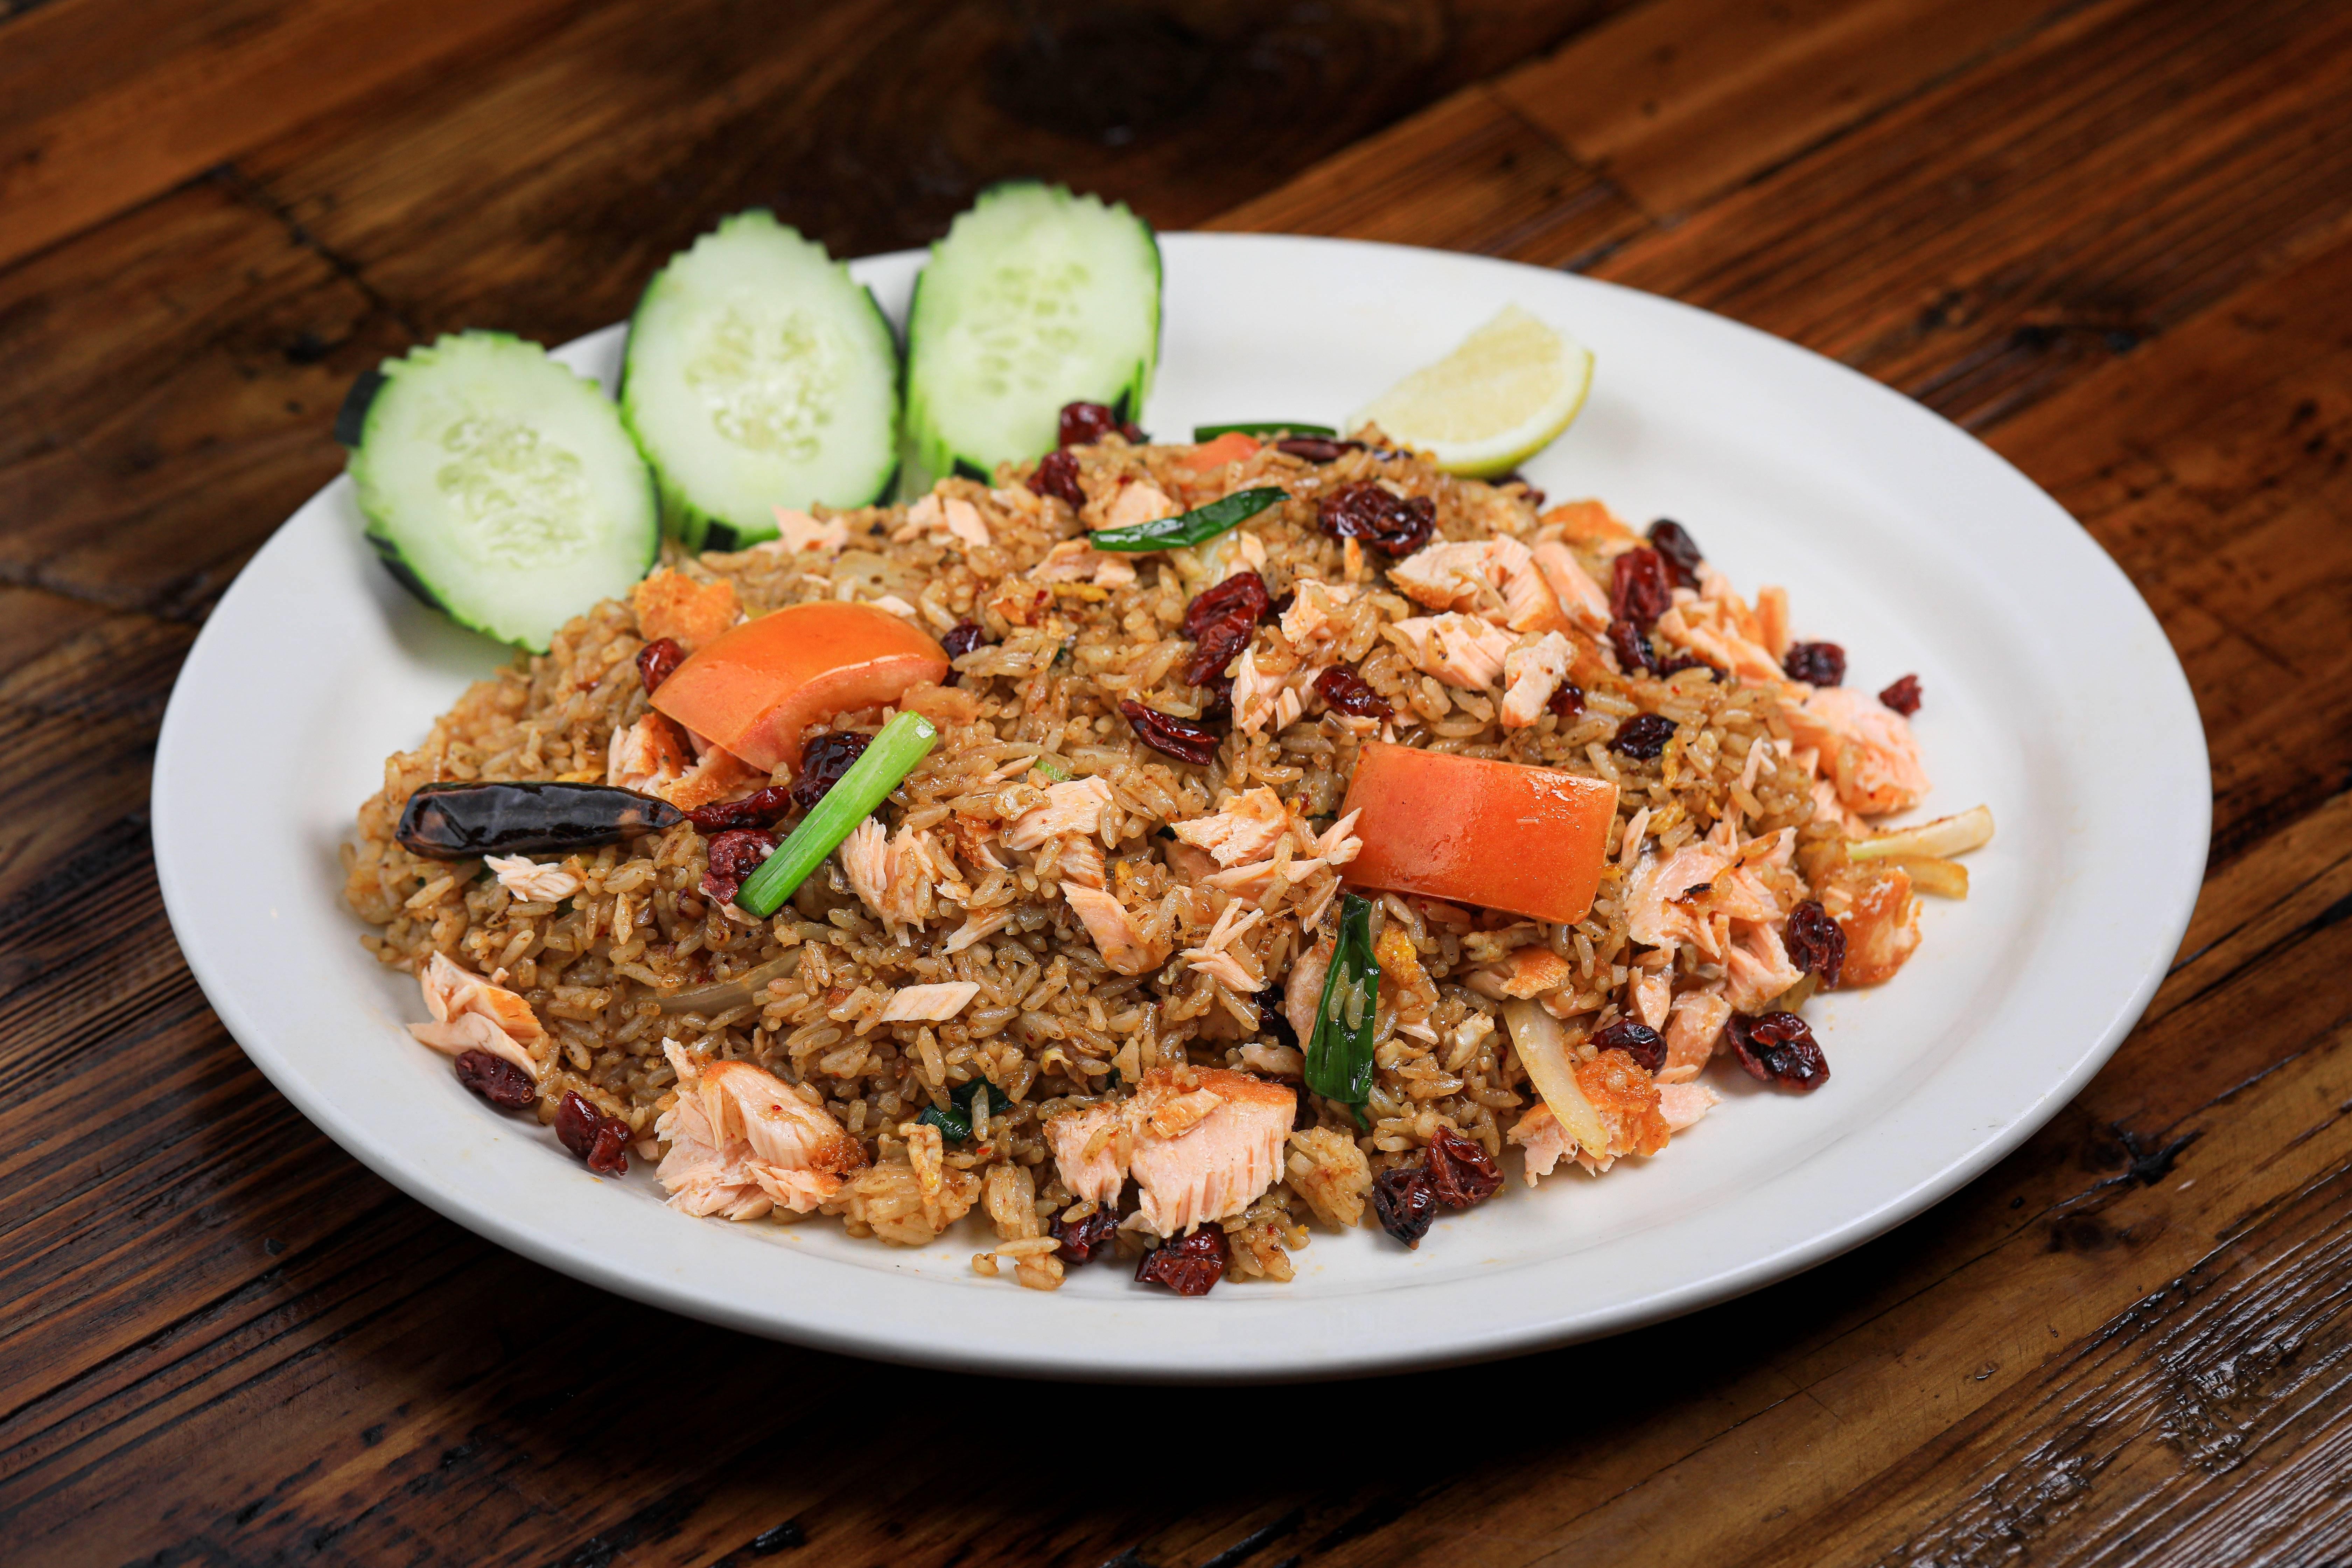 Grilled Chili Fried Rice with Salmon